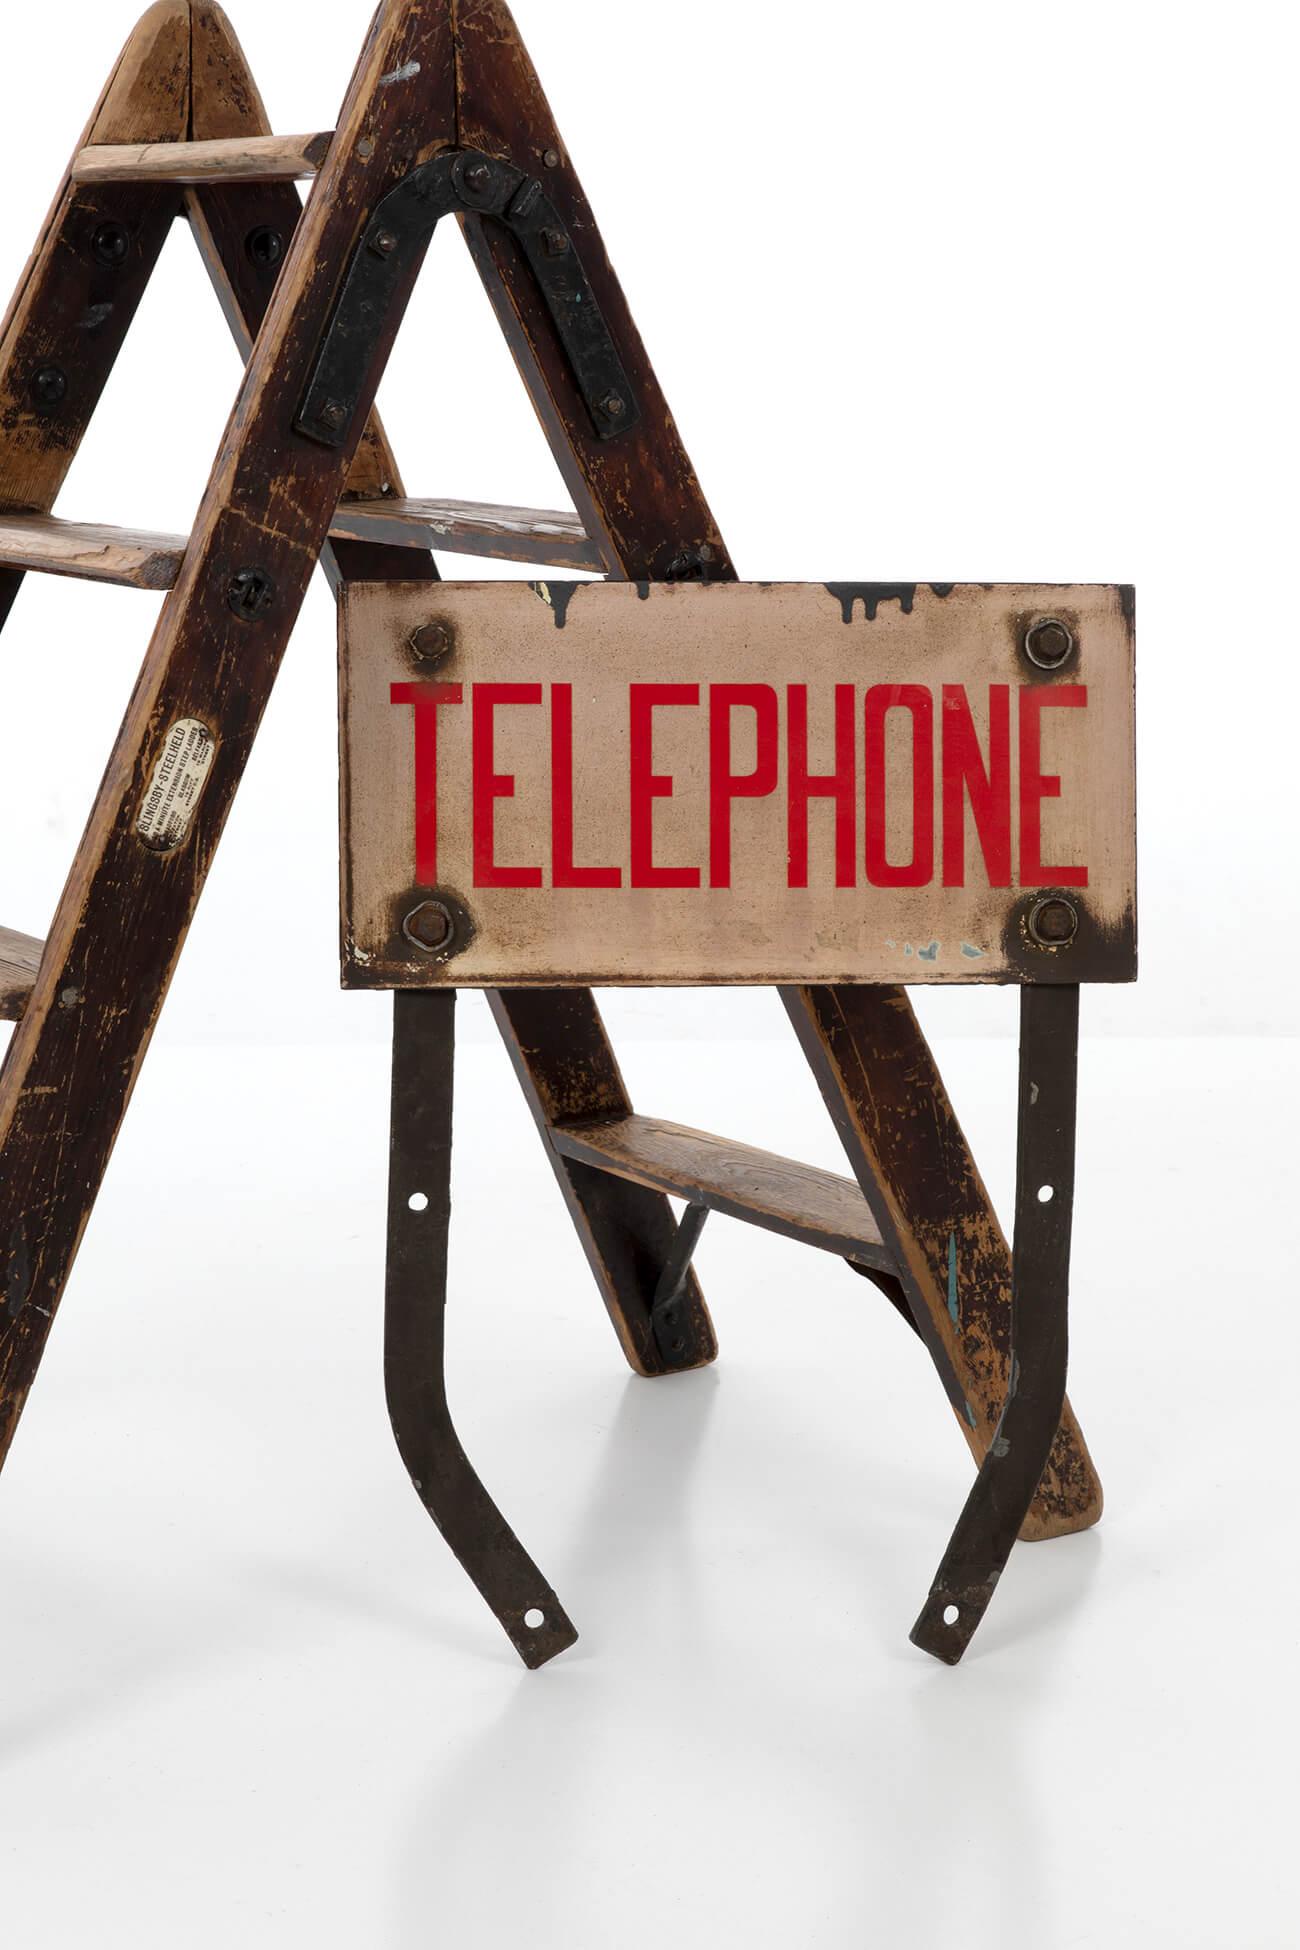 Industrial Enamel Telephone Sign, circa 1950s For Sale 1